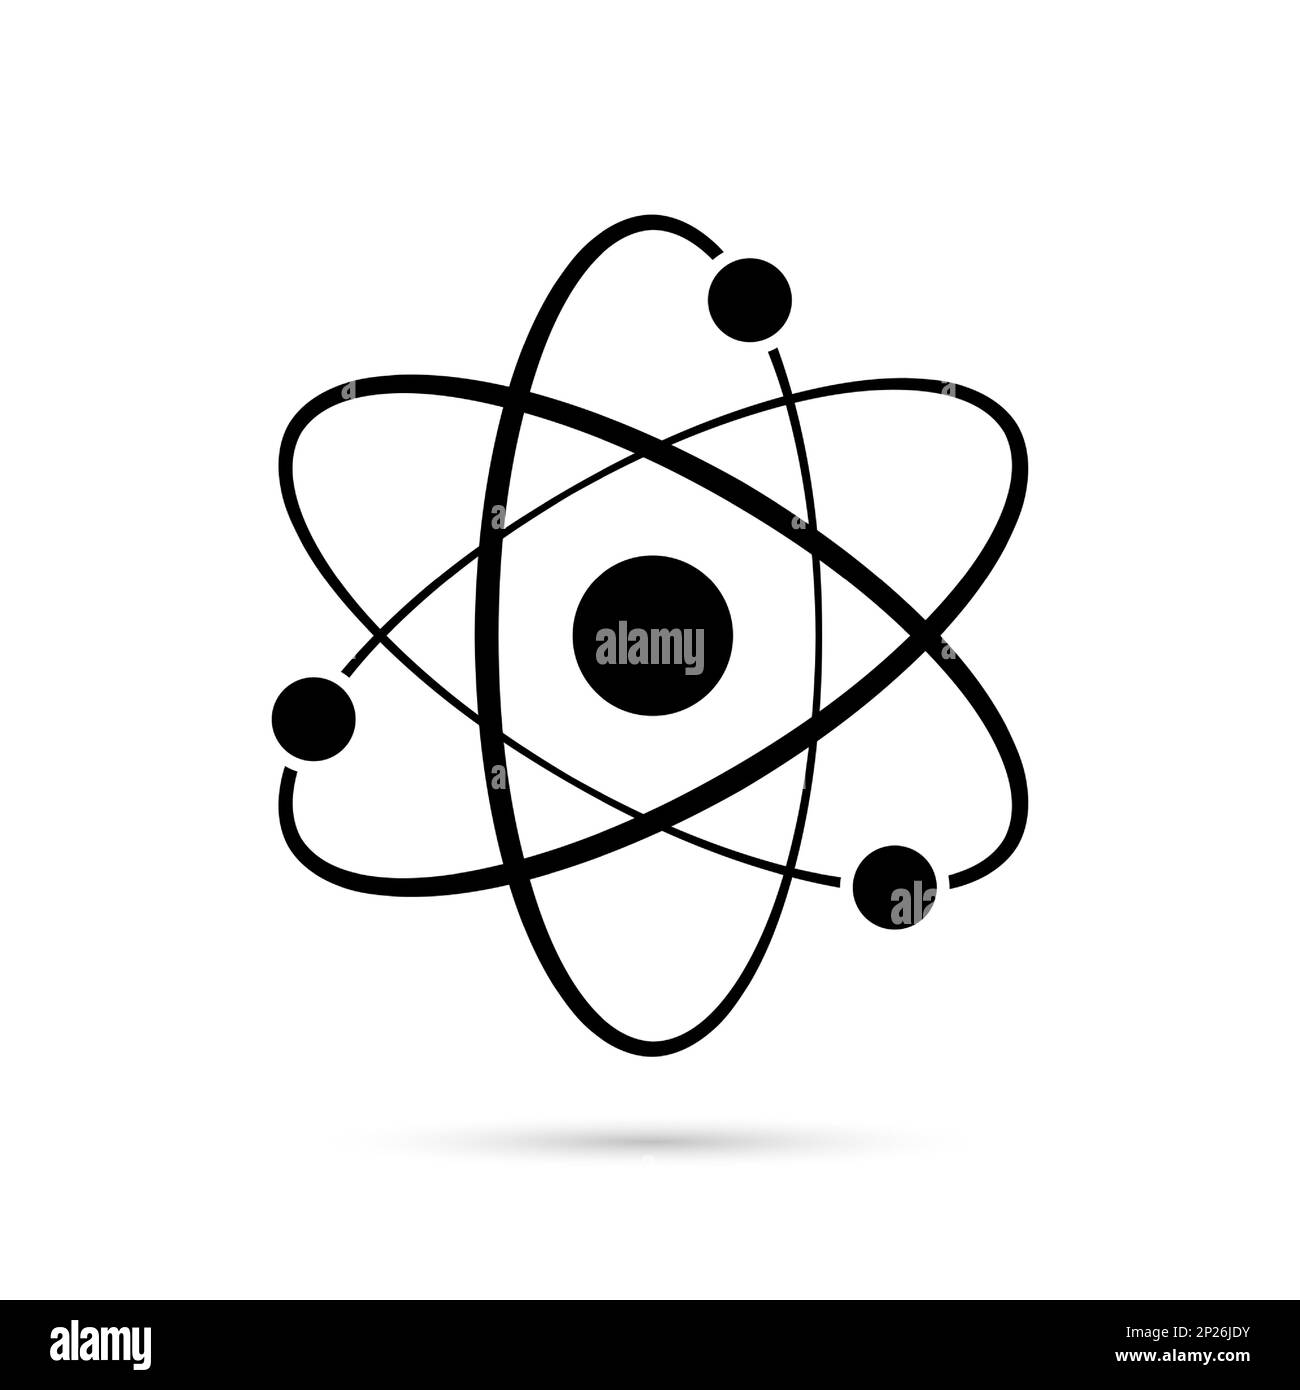 Atom icon. Quantum physics. Black color logo isolated on white background. Medical symbol. Nuclear energy. Molecule structure. Fusion reactor Stock Vector